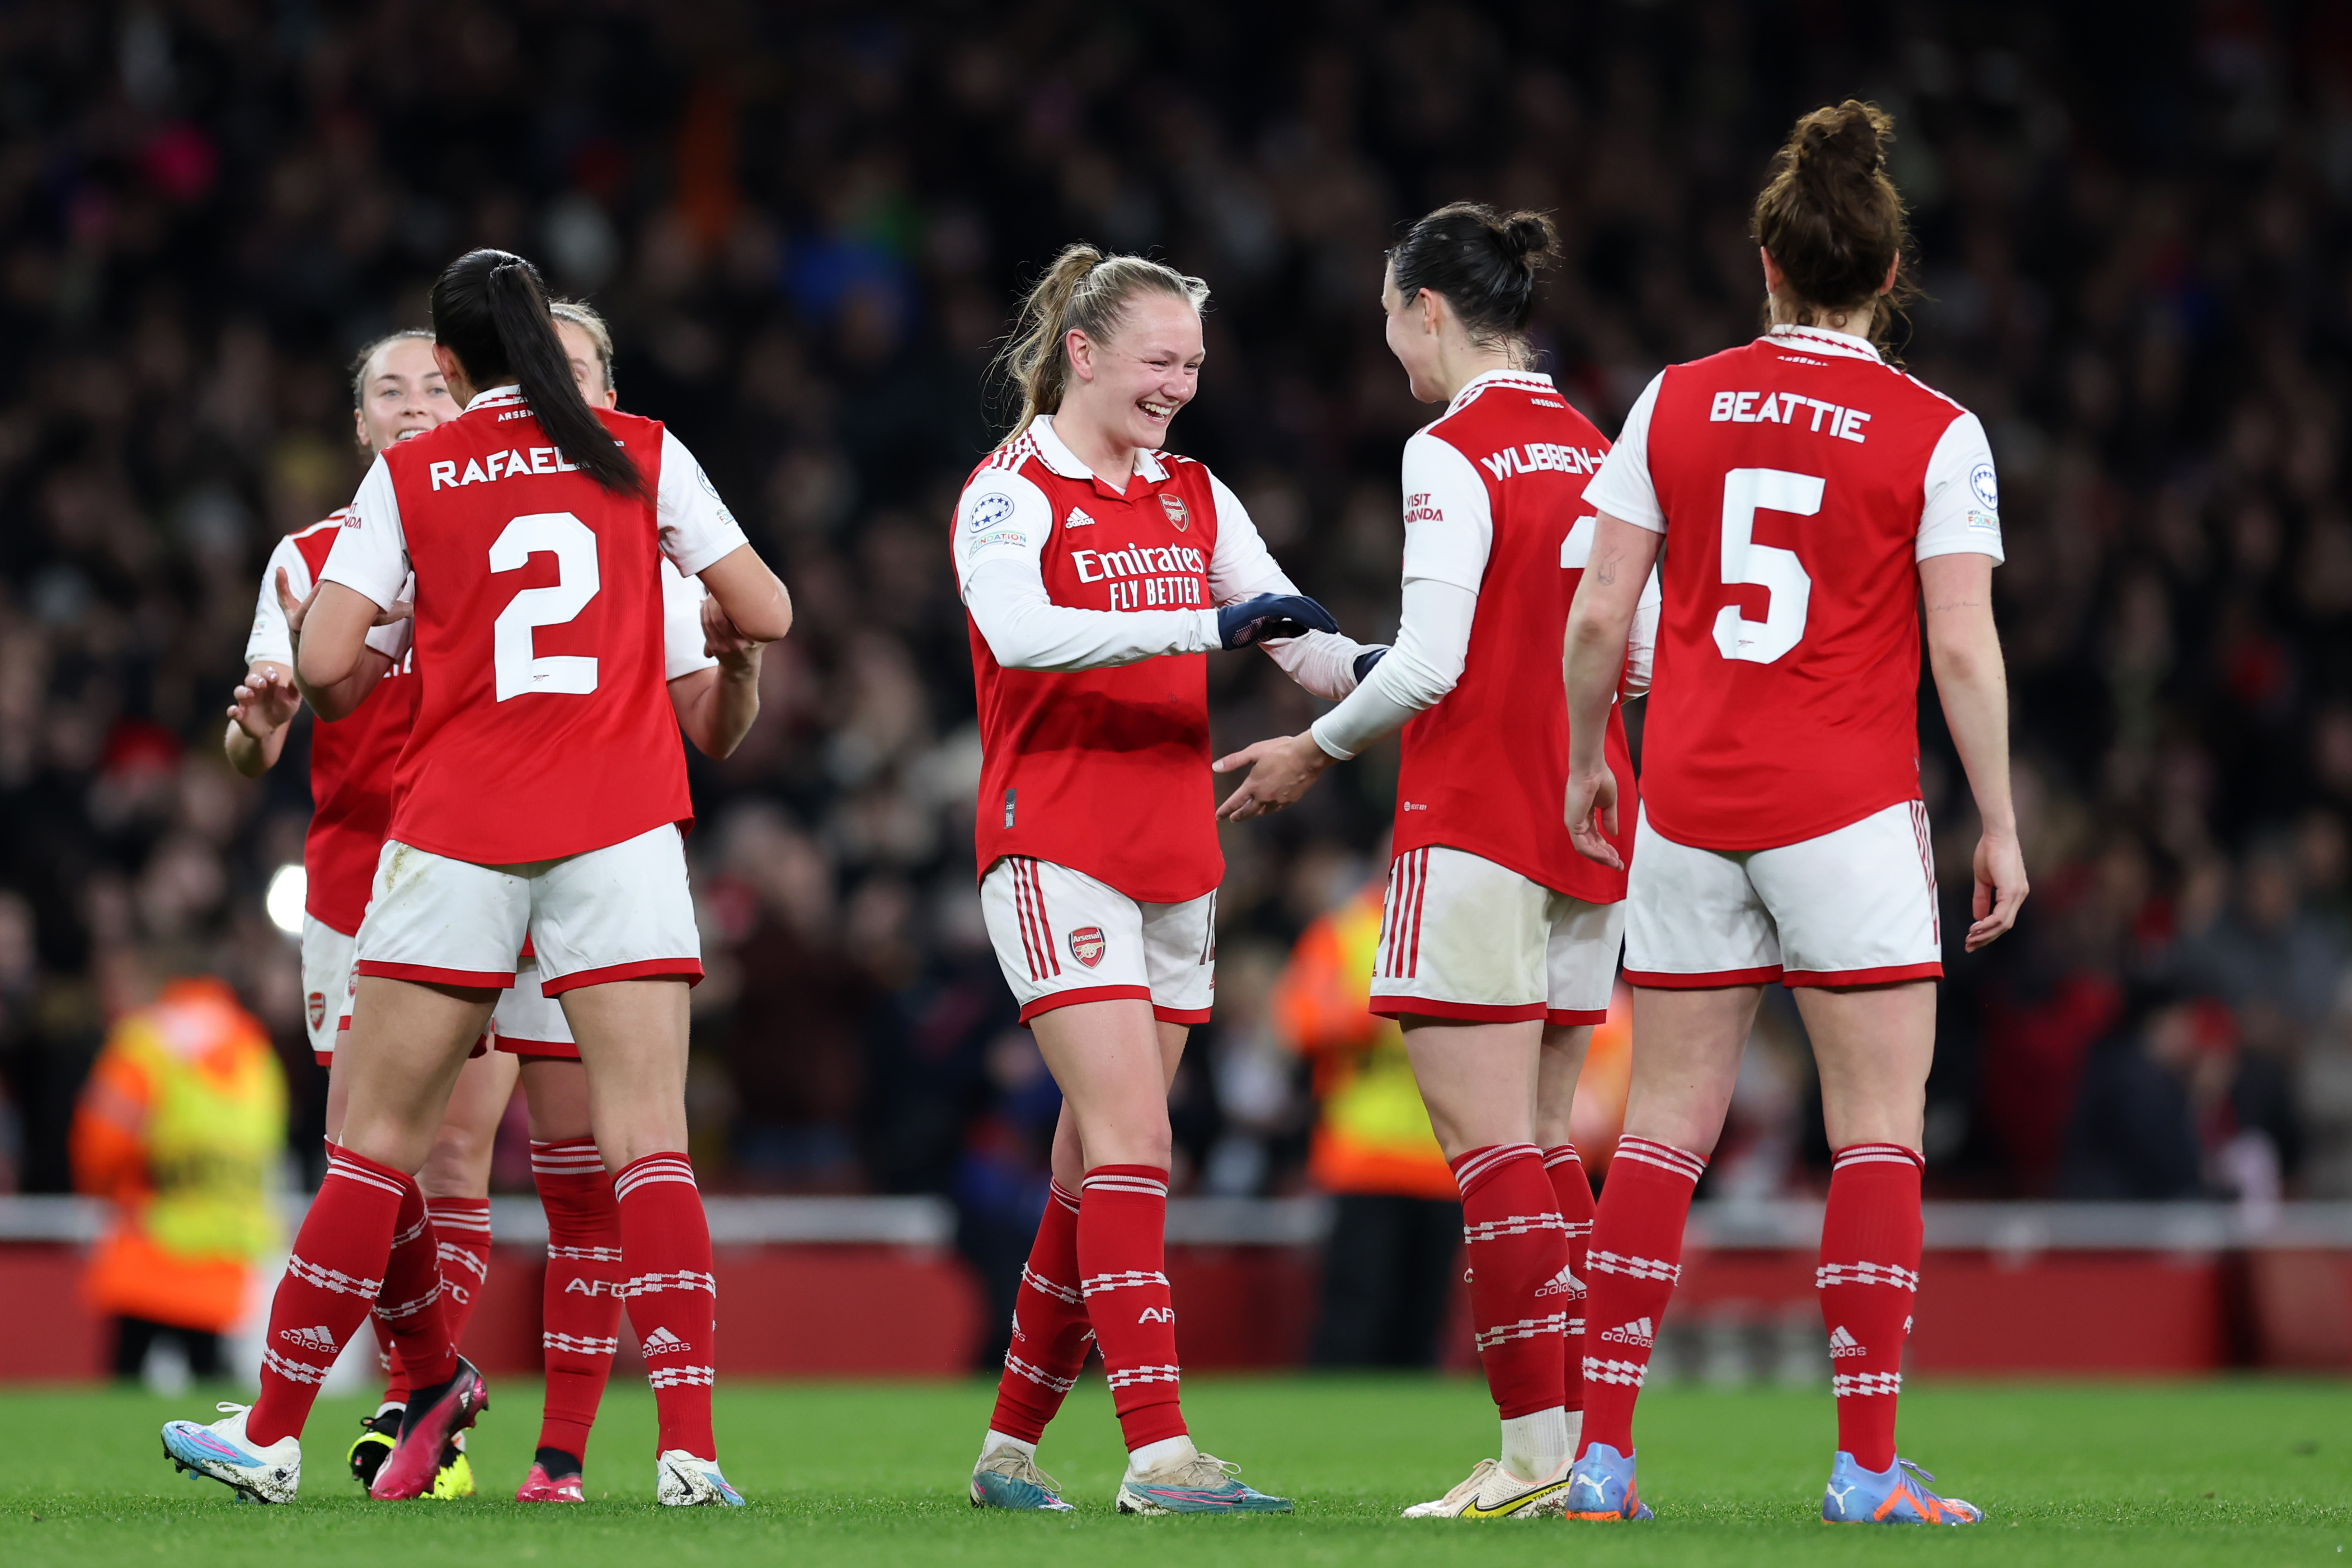 Live Blog: Arsenal Women travel to Everton in the WSL